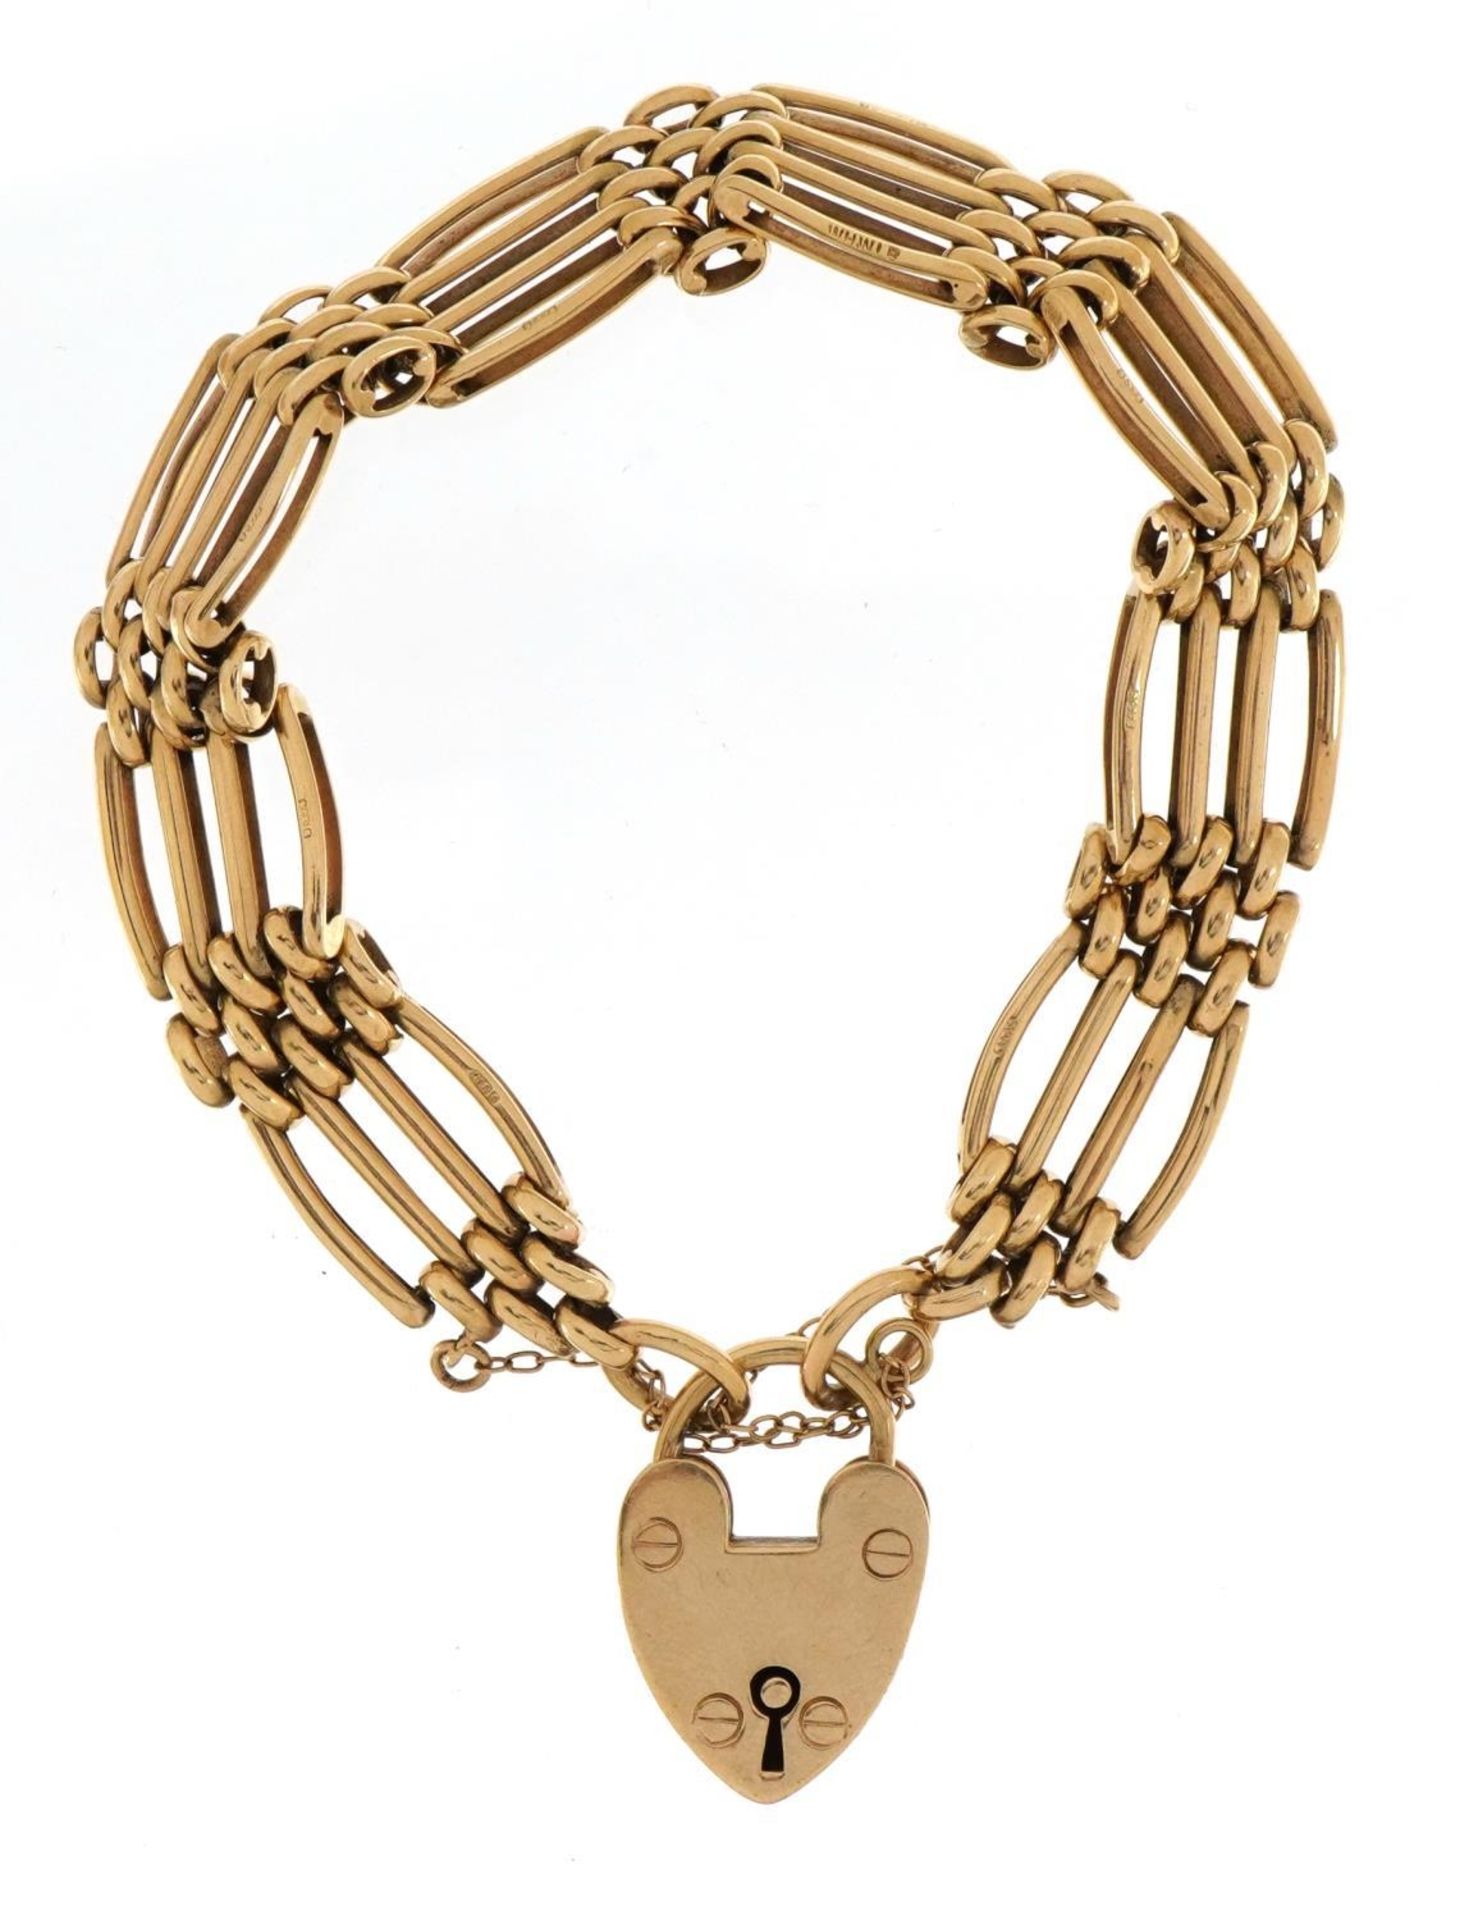 9ct gold three row gate link bracelet with 9ct gold love heart padlock, 18cm in length, 25.0g - Image 2 of 4